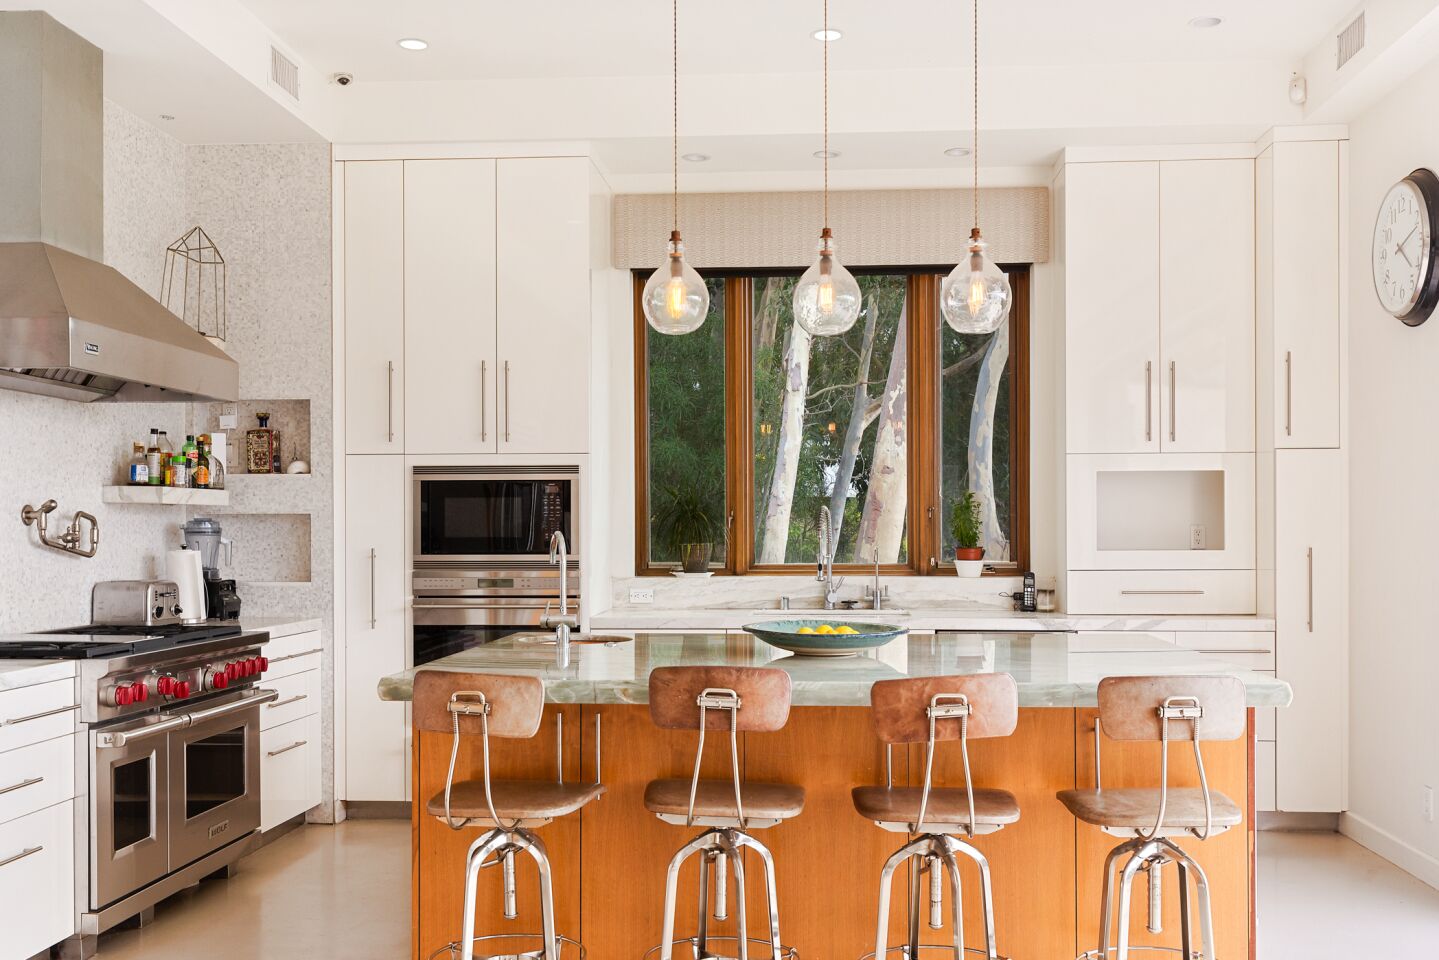 The kitchen has a large with seating for four, tall cabinets and large window over the sink.